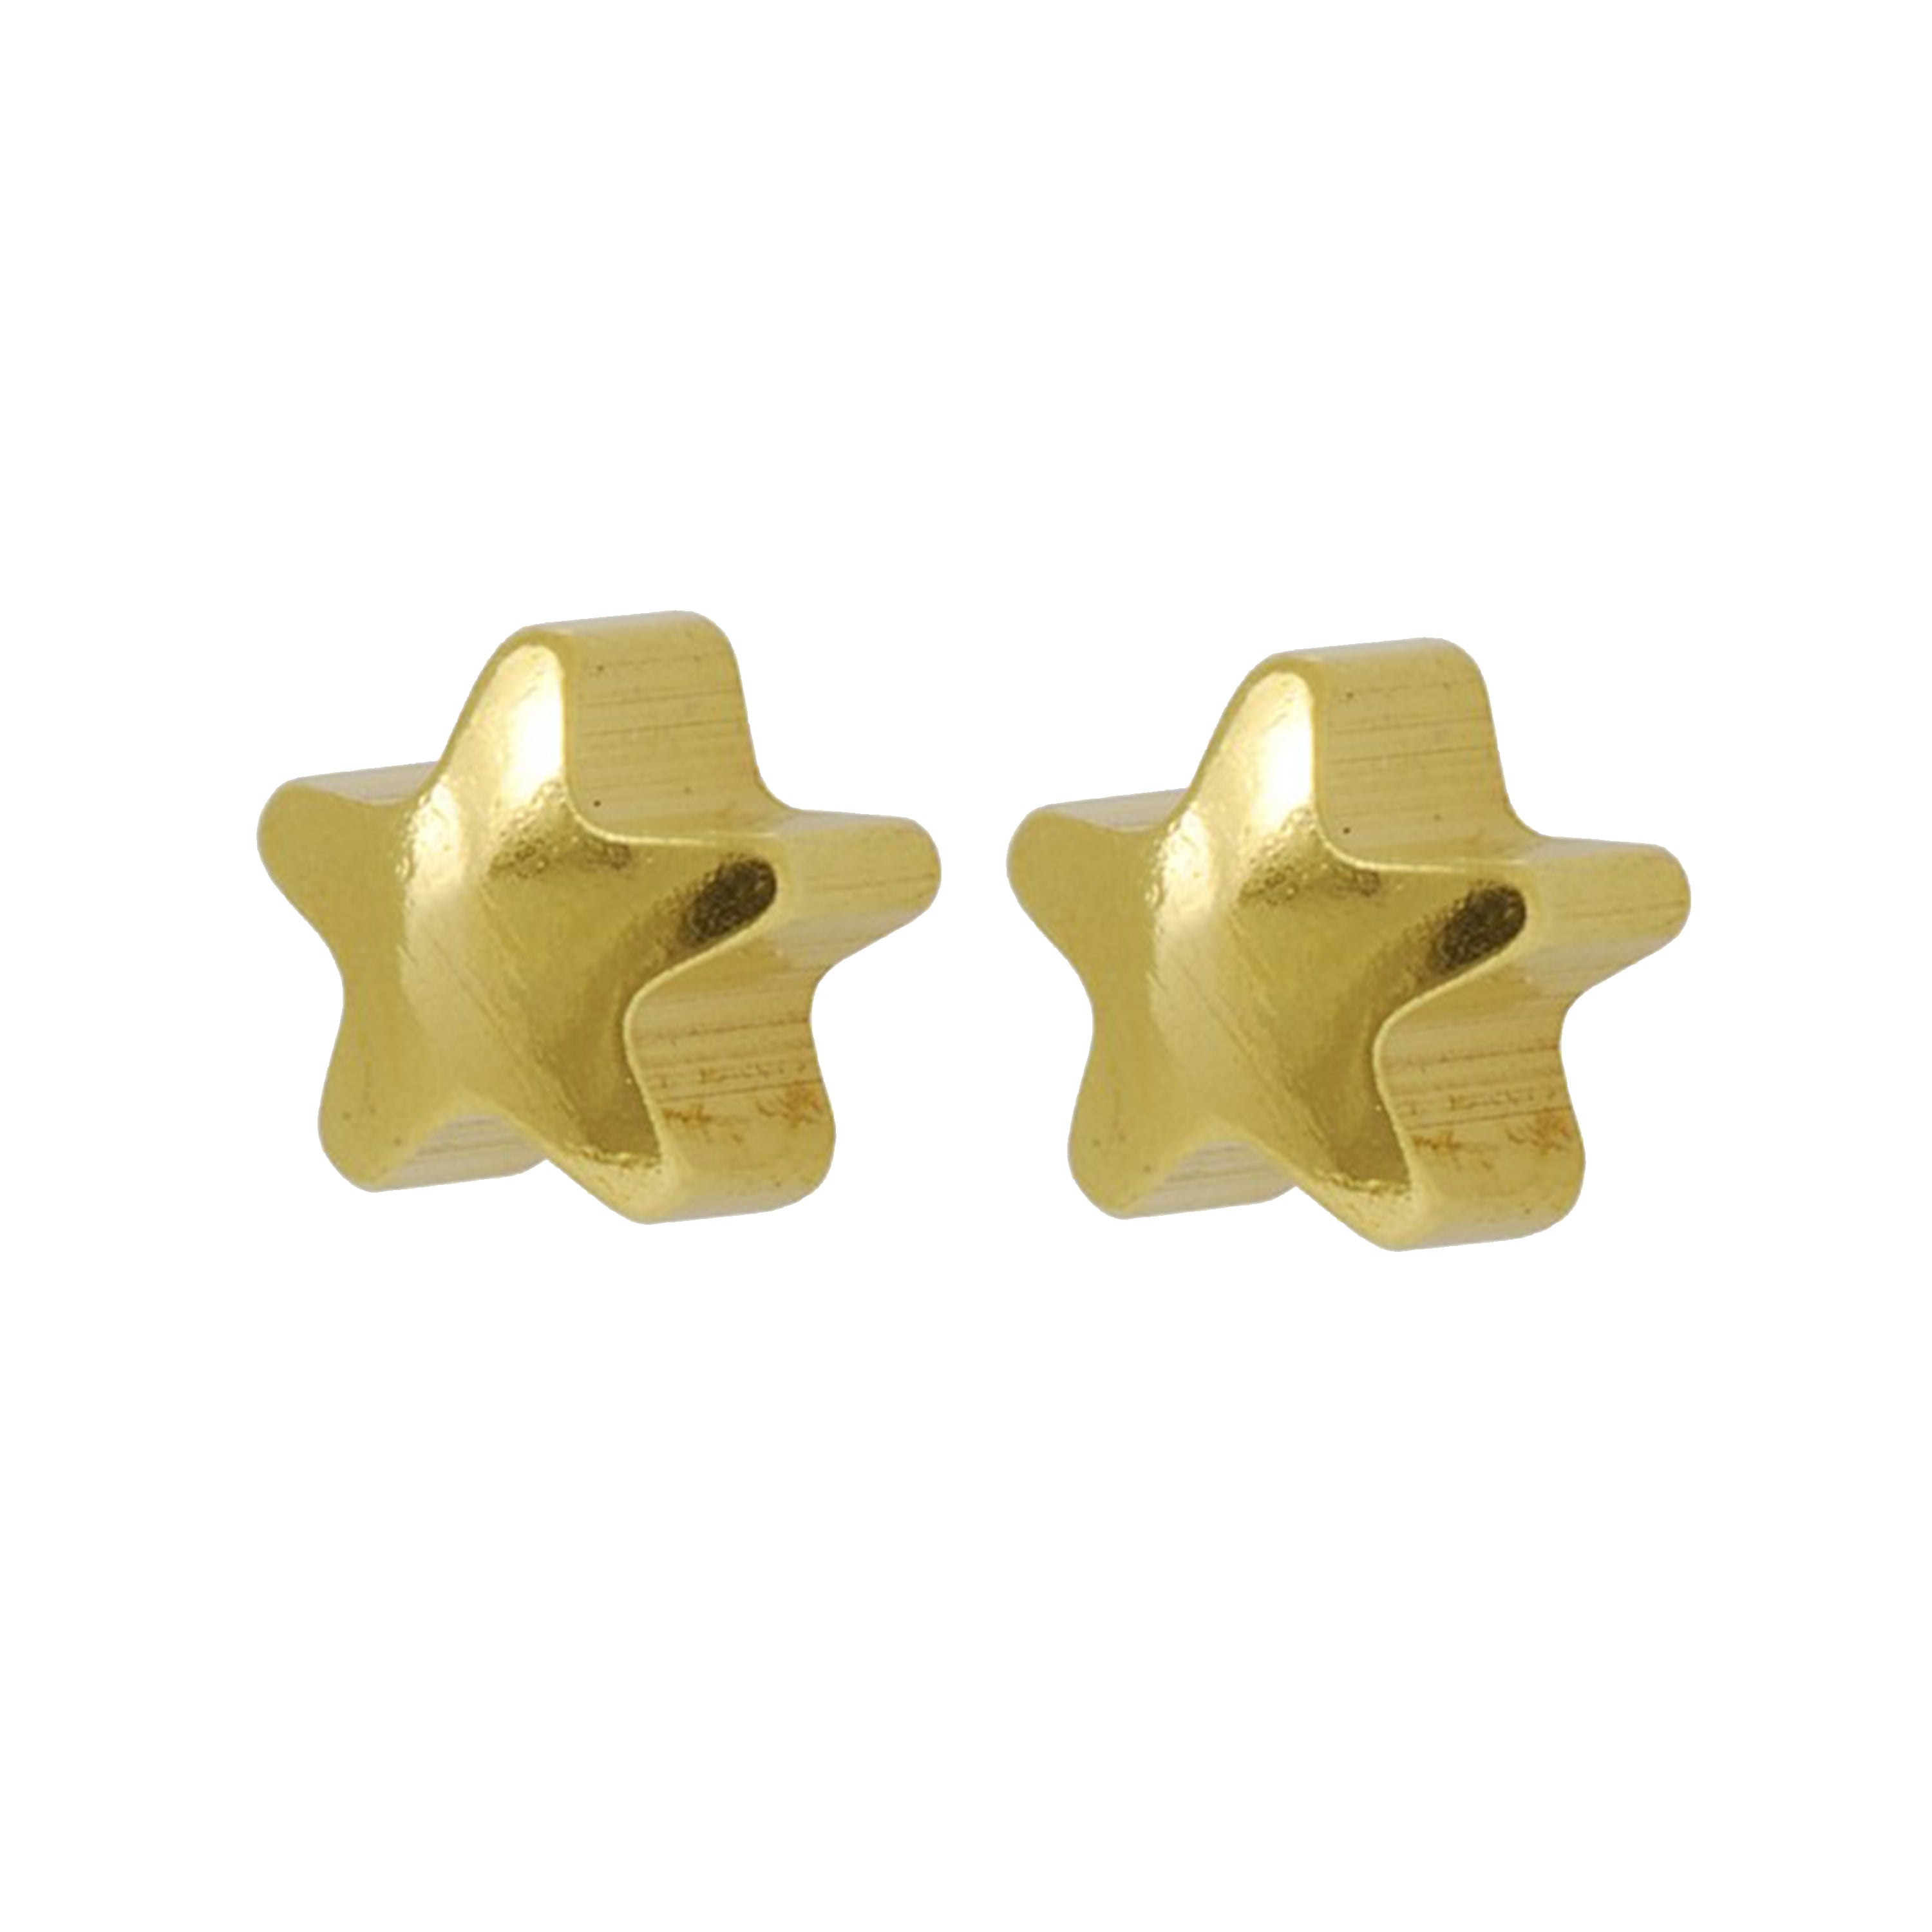 3MM Star 24K Pure Gold Plated Ear Studs | MADE IN USA | Ideal for everyday wear